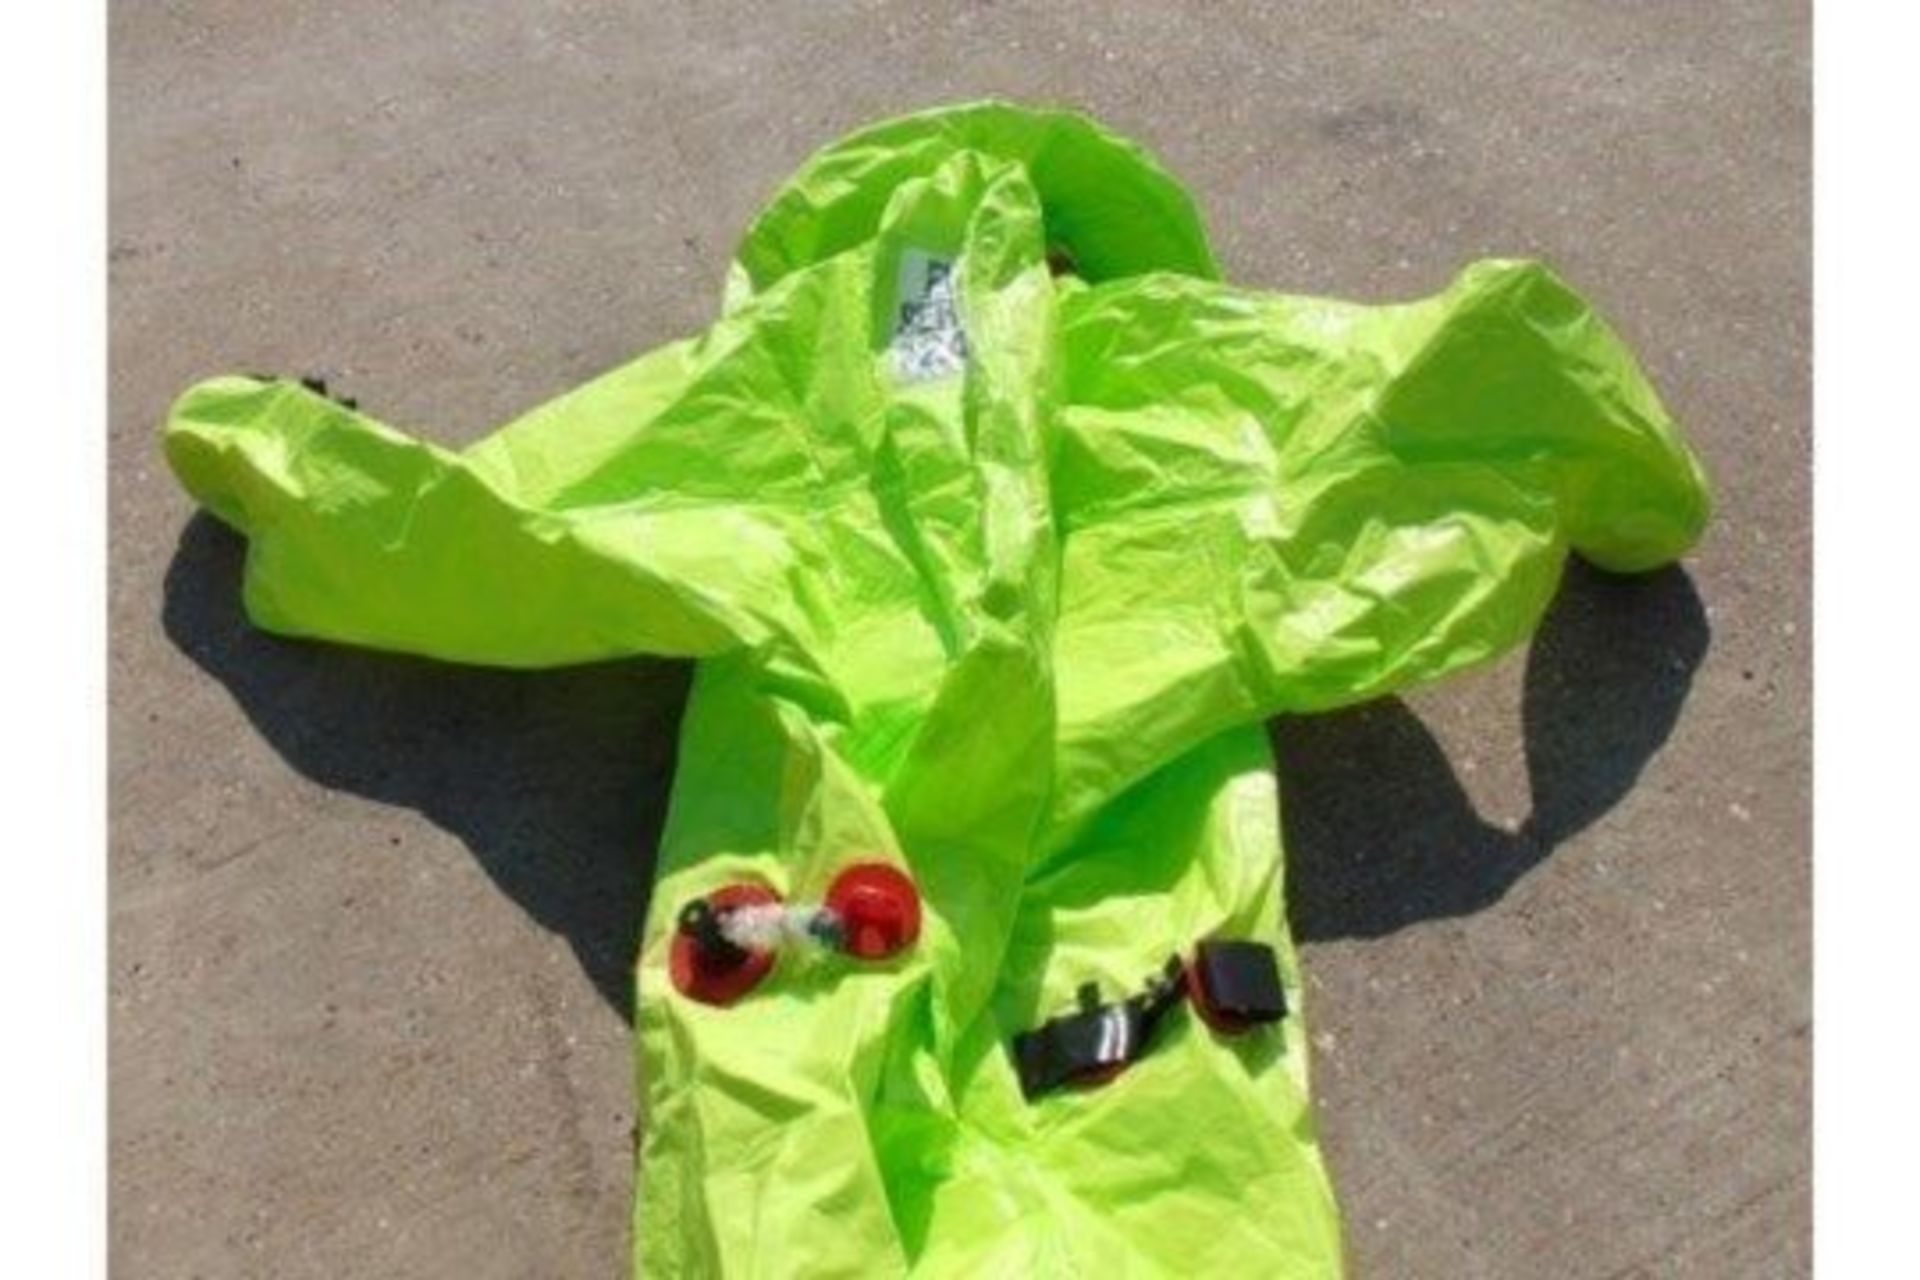 10 x Respirex Tychem TK Gas-Tight Hazmat Suit Type 1A with Attached Boots and Gloves. - Image 7 of 10